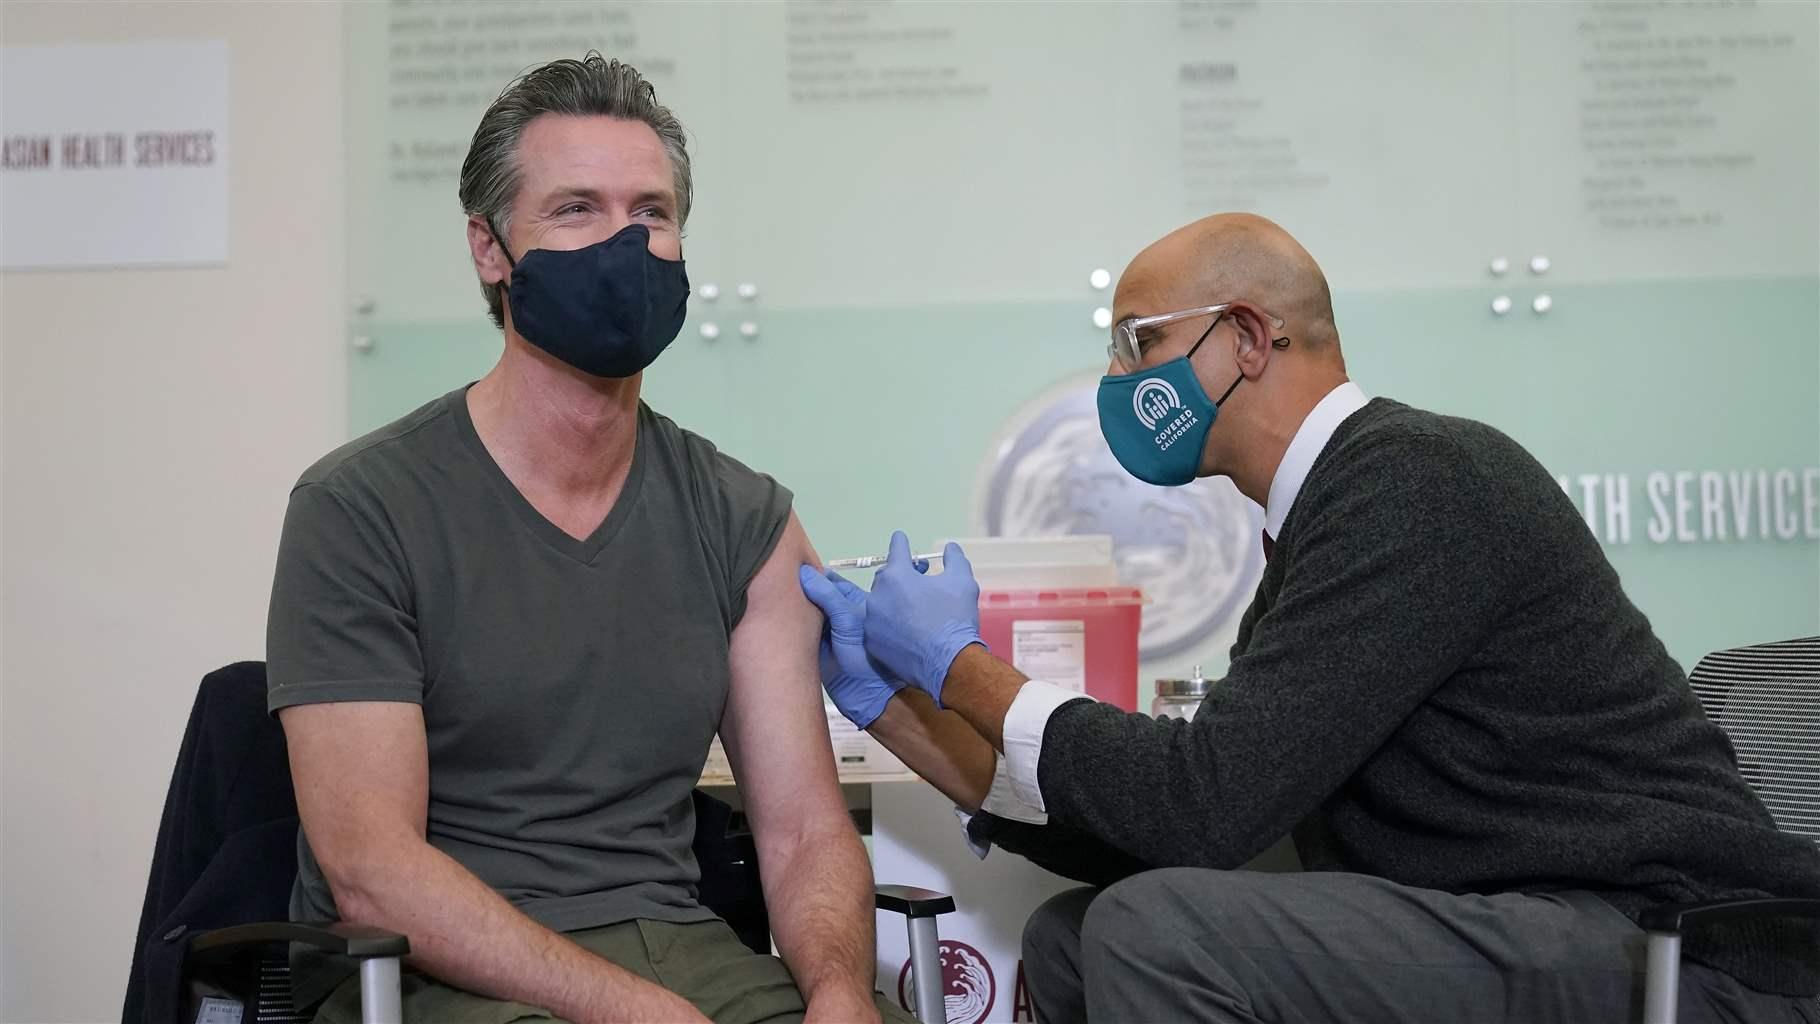 California Gov. Gavin Newsom, left, receives a Moderna COVID-19 vaccine booster shot from California Health and Human Services Secretary Dr. Mark Ghaly at Asian Health Services in Oakland, Calif., Wednesday, Oct. 27, 2021.